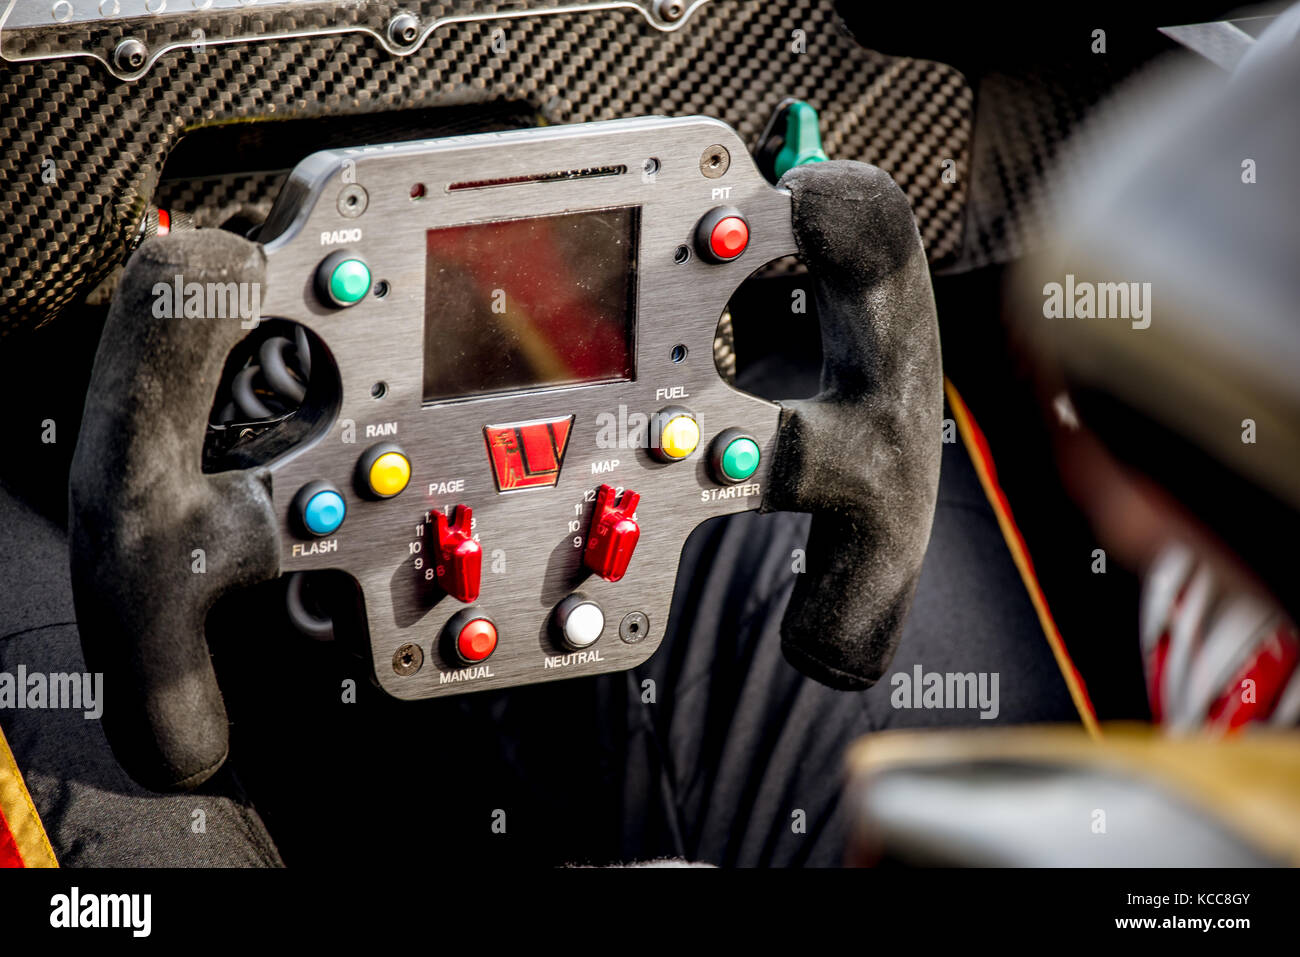 Vallelunga, Italy september 24 2017. Racing car steering wheel with pushbutton commands close up colorful detail Stock Photo